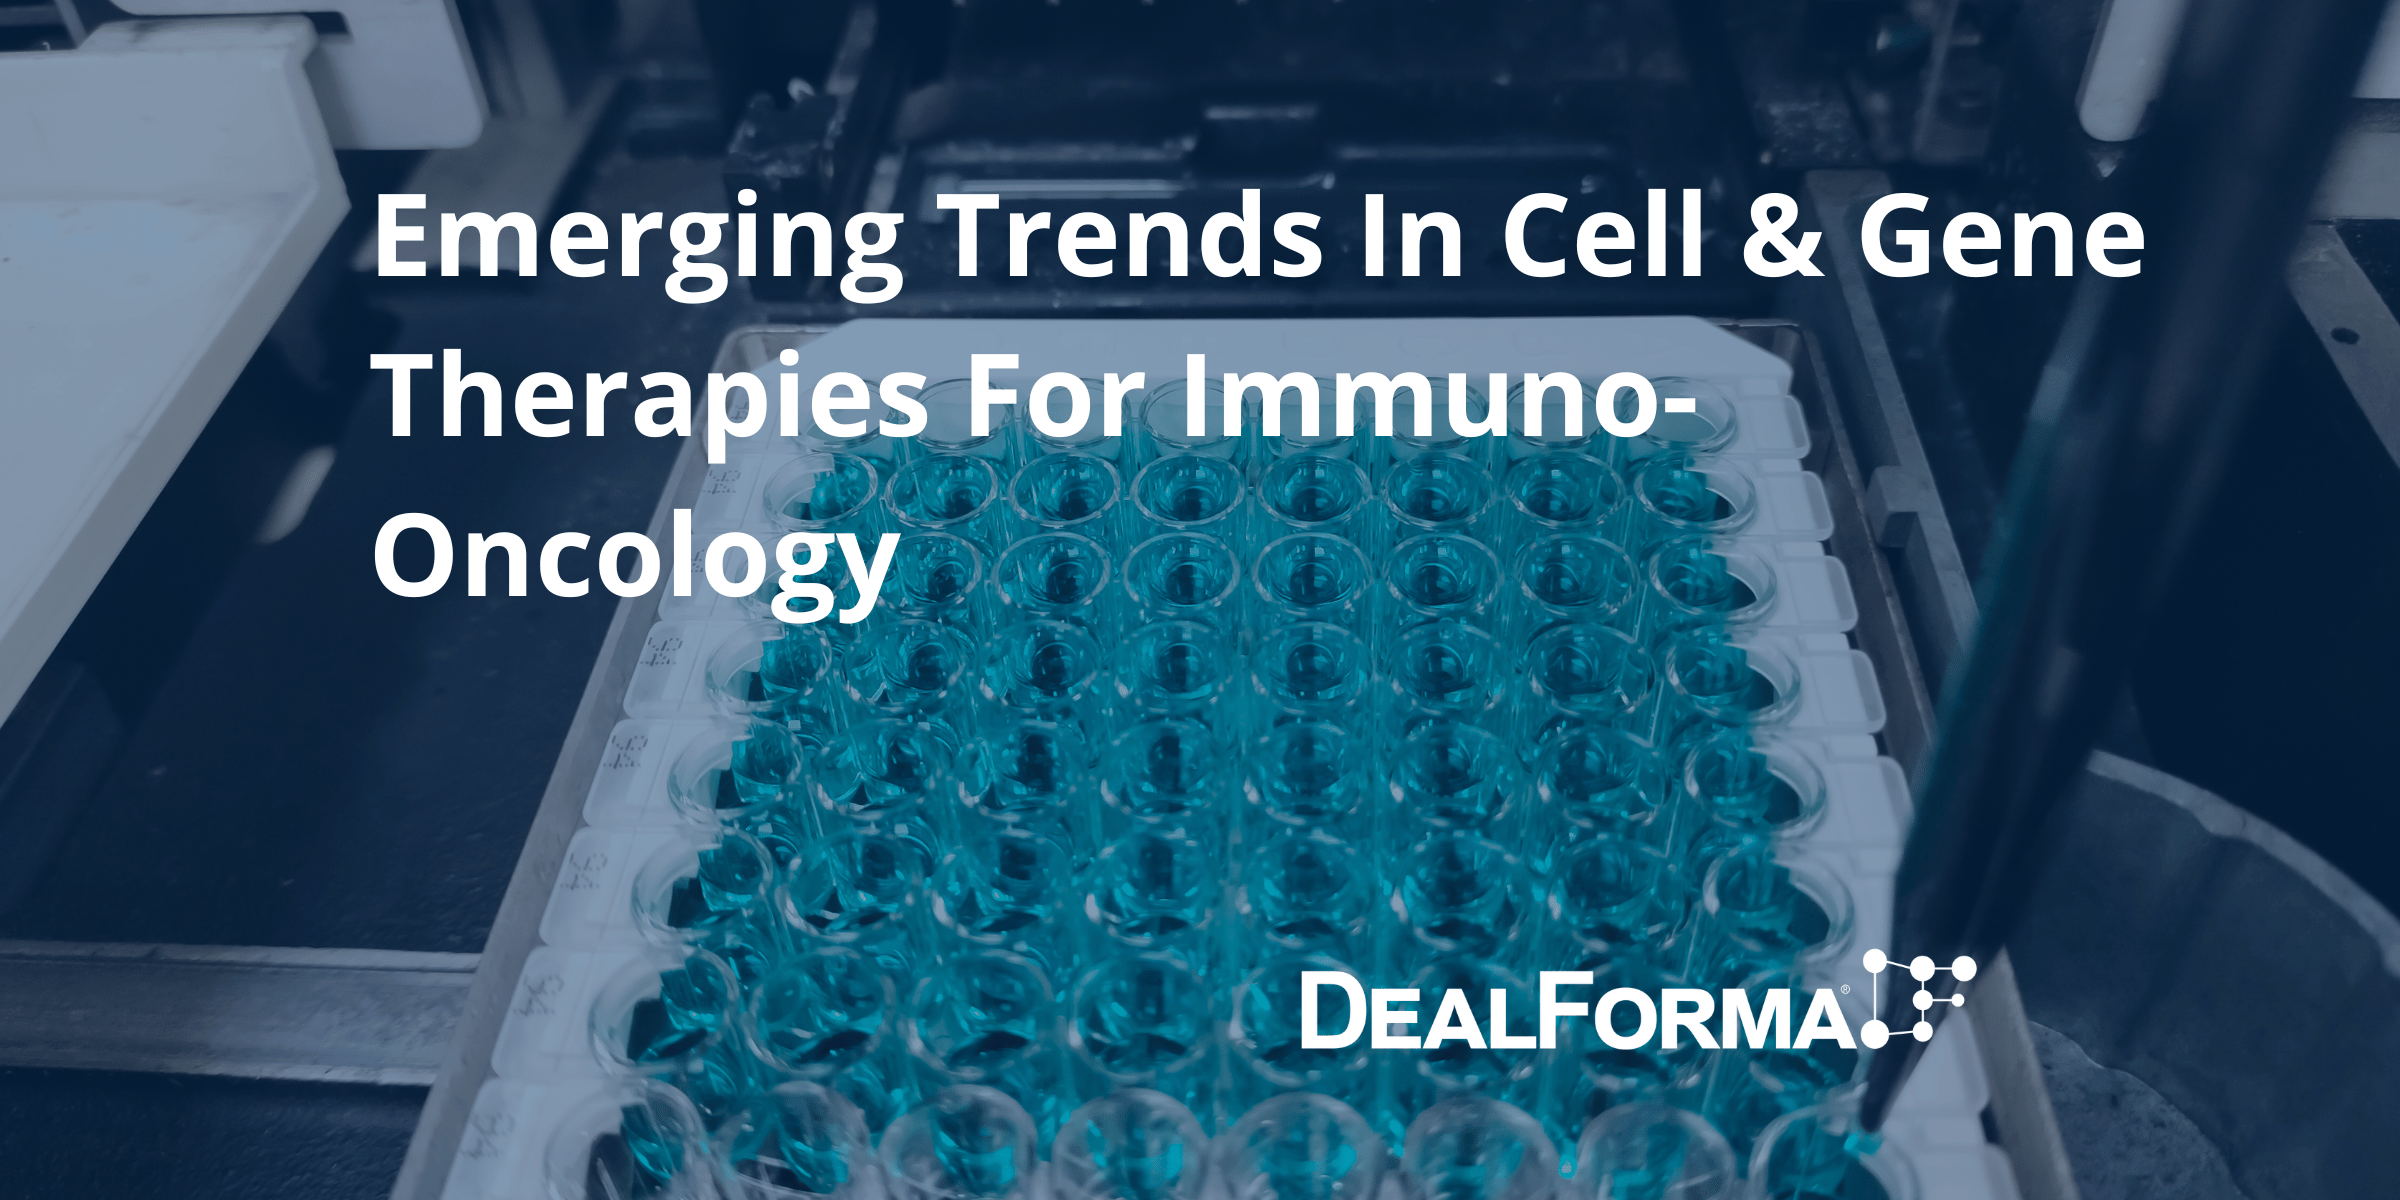 Emerging Trends In Cell & Gene Therapies For Immuno-Oncology